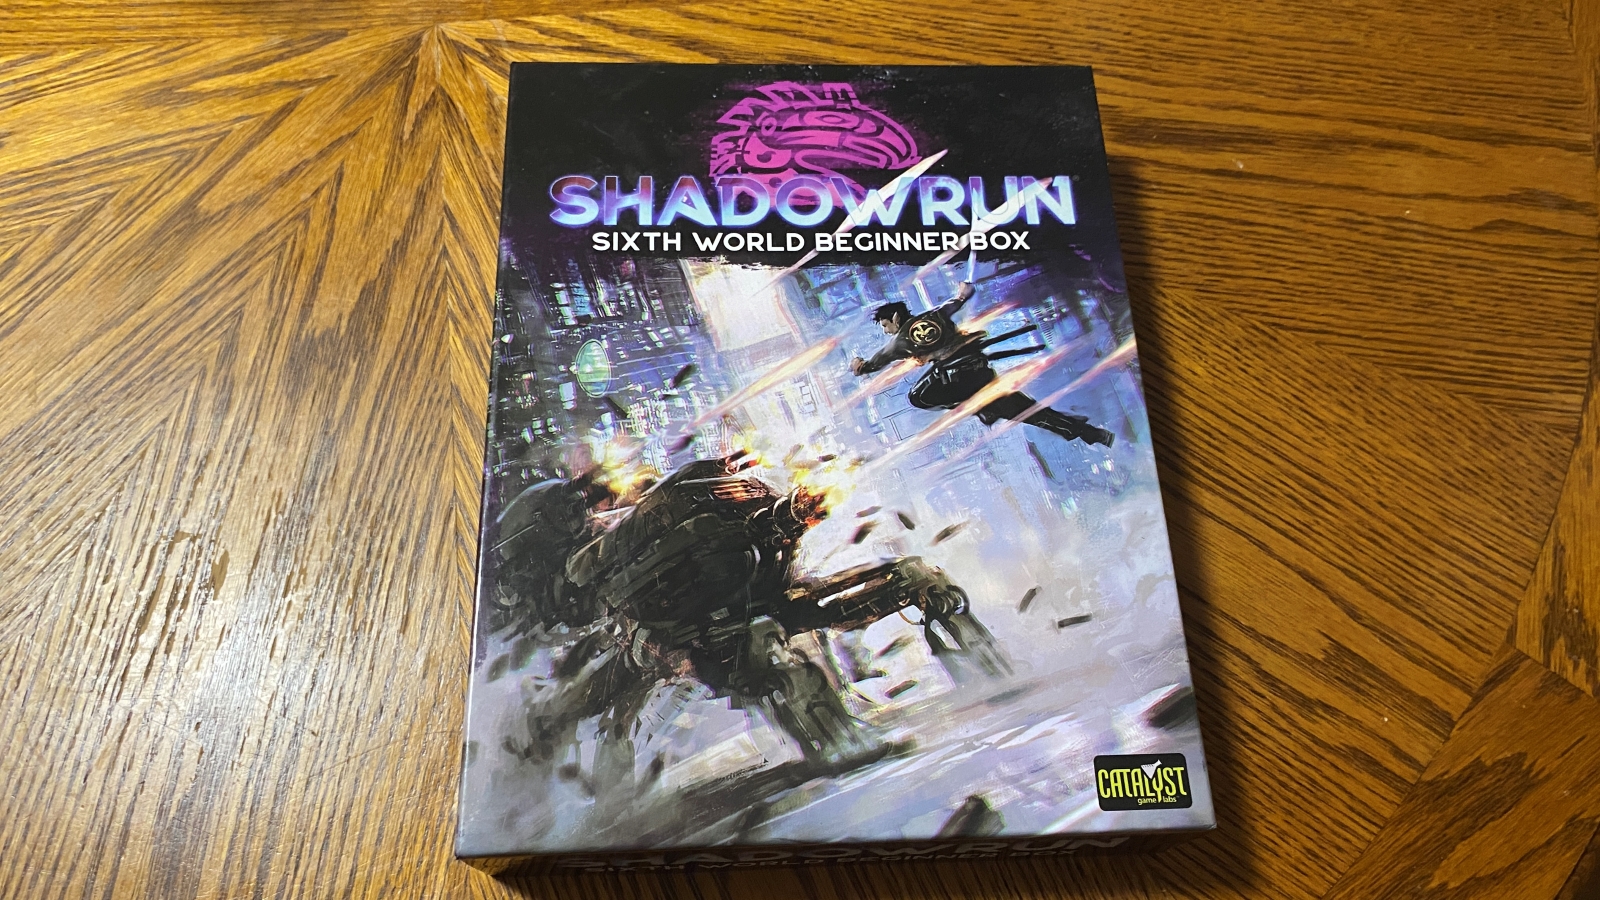 Shadowrun - Are you looking to build up your Shadowrun 5